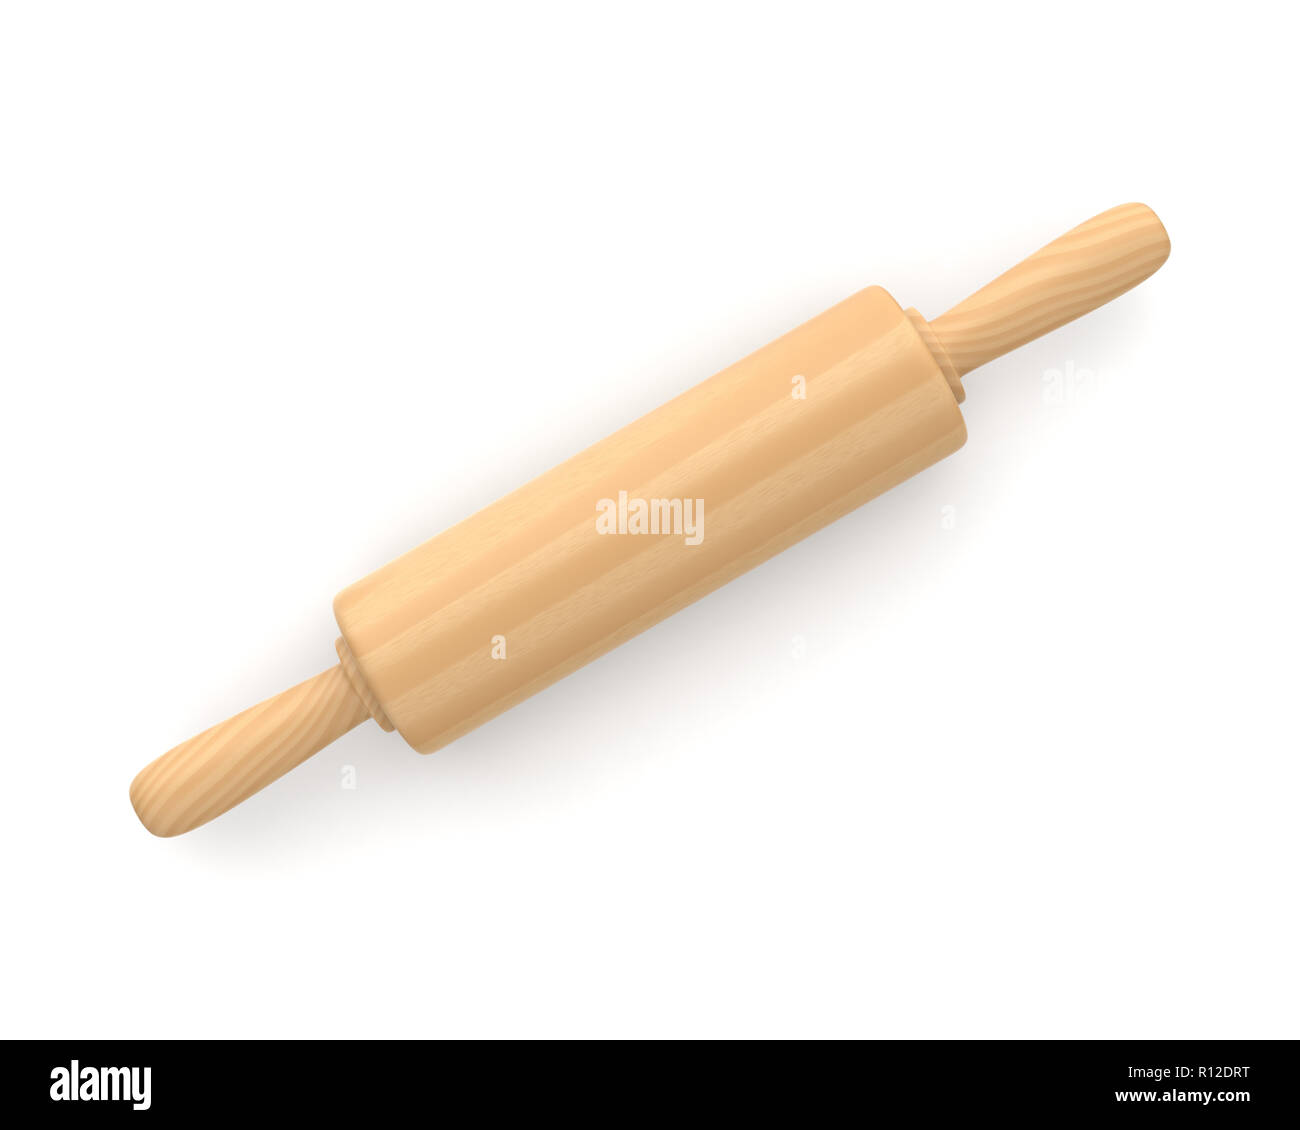 Rolling pin, dough roller isolated against white background. Wood roller  for pastry and baking kitcenware utensil. 3d illustration Stock Photo -  Alamy